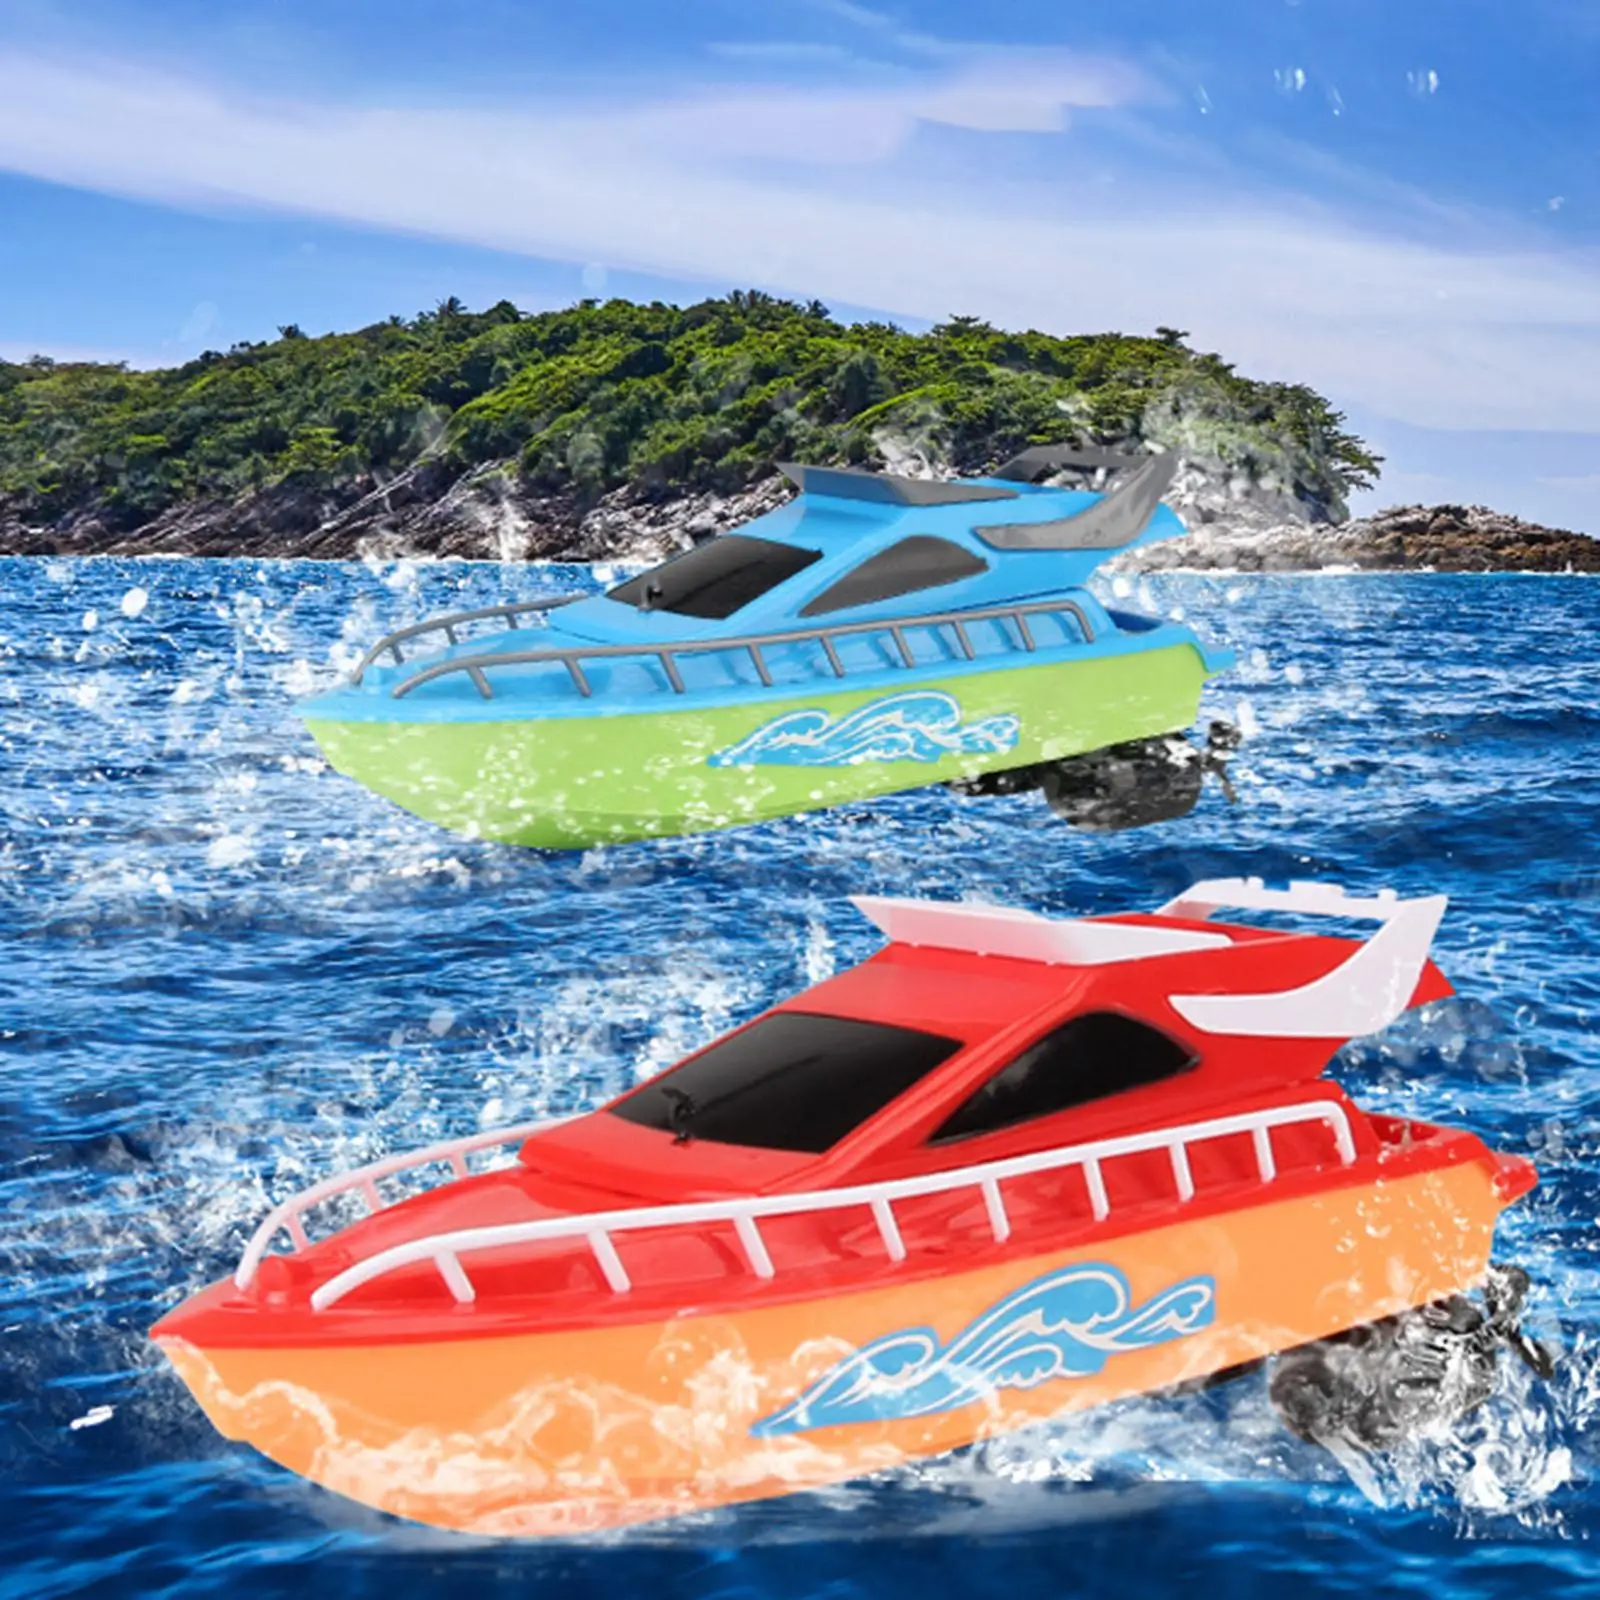 High Speed Remote Control Speedboat Pools Lakes Outdoor Toys for Boys Toy